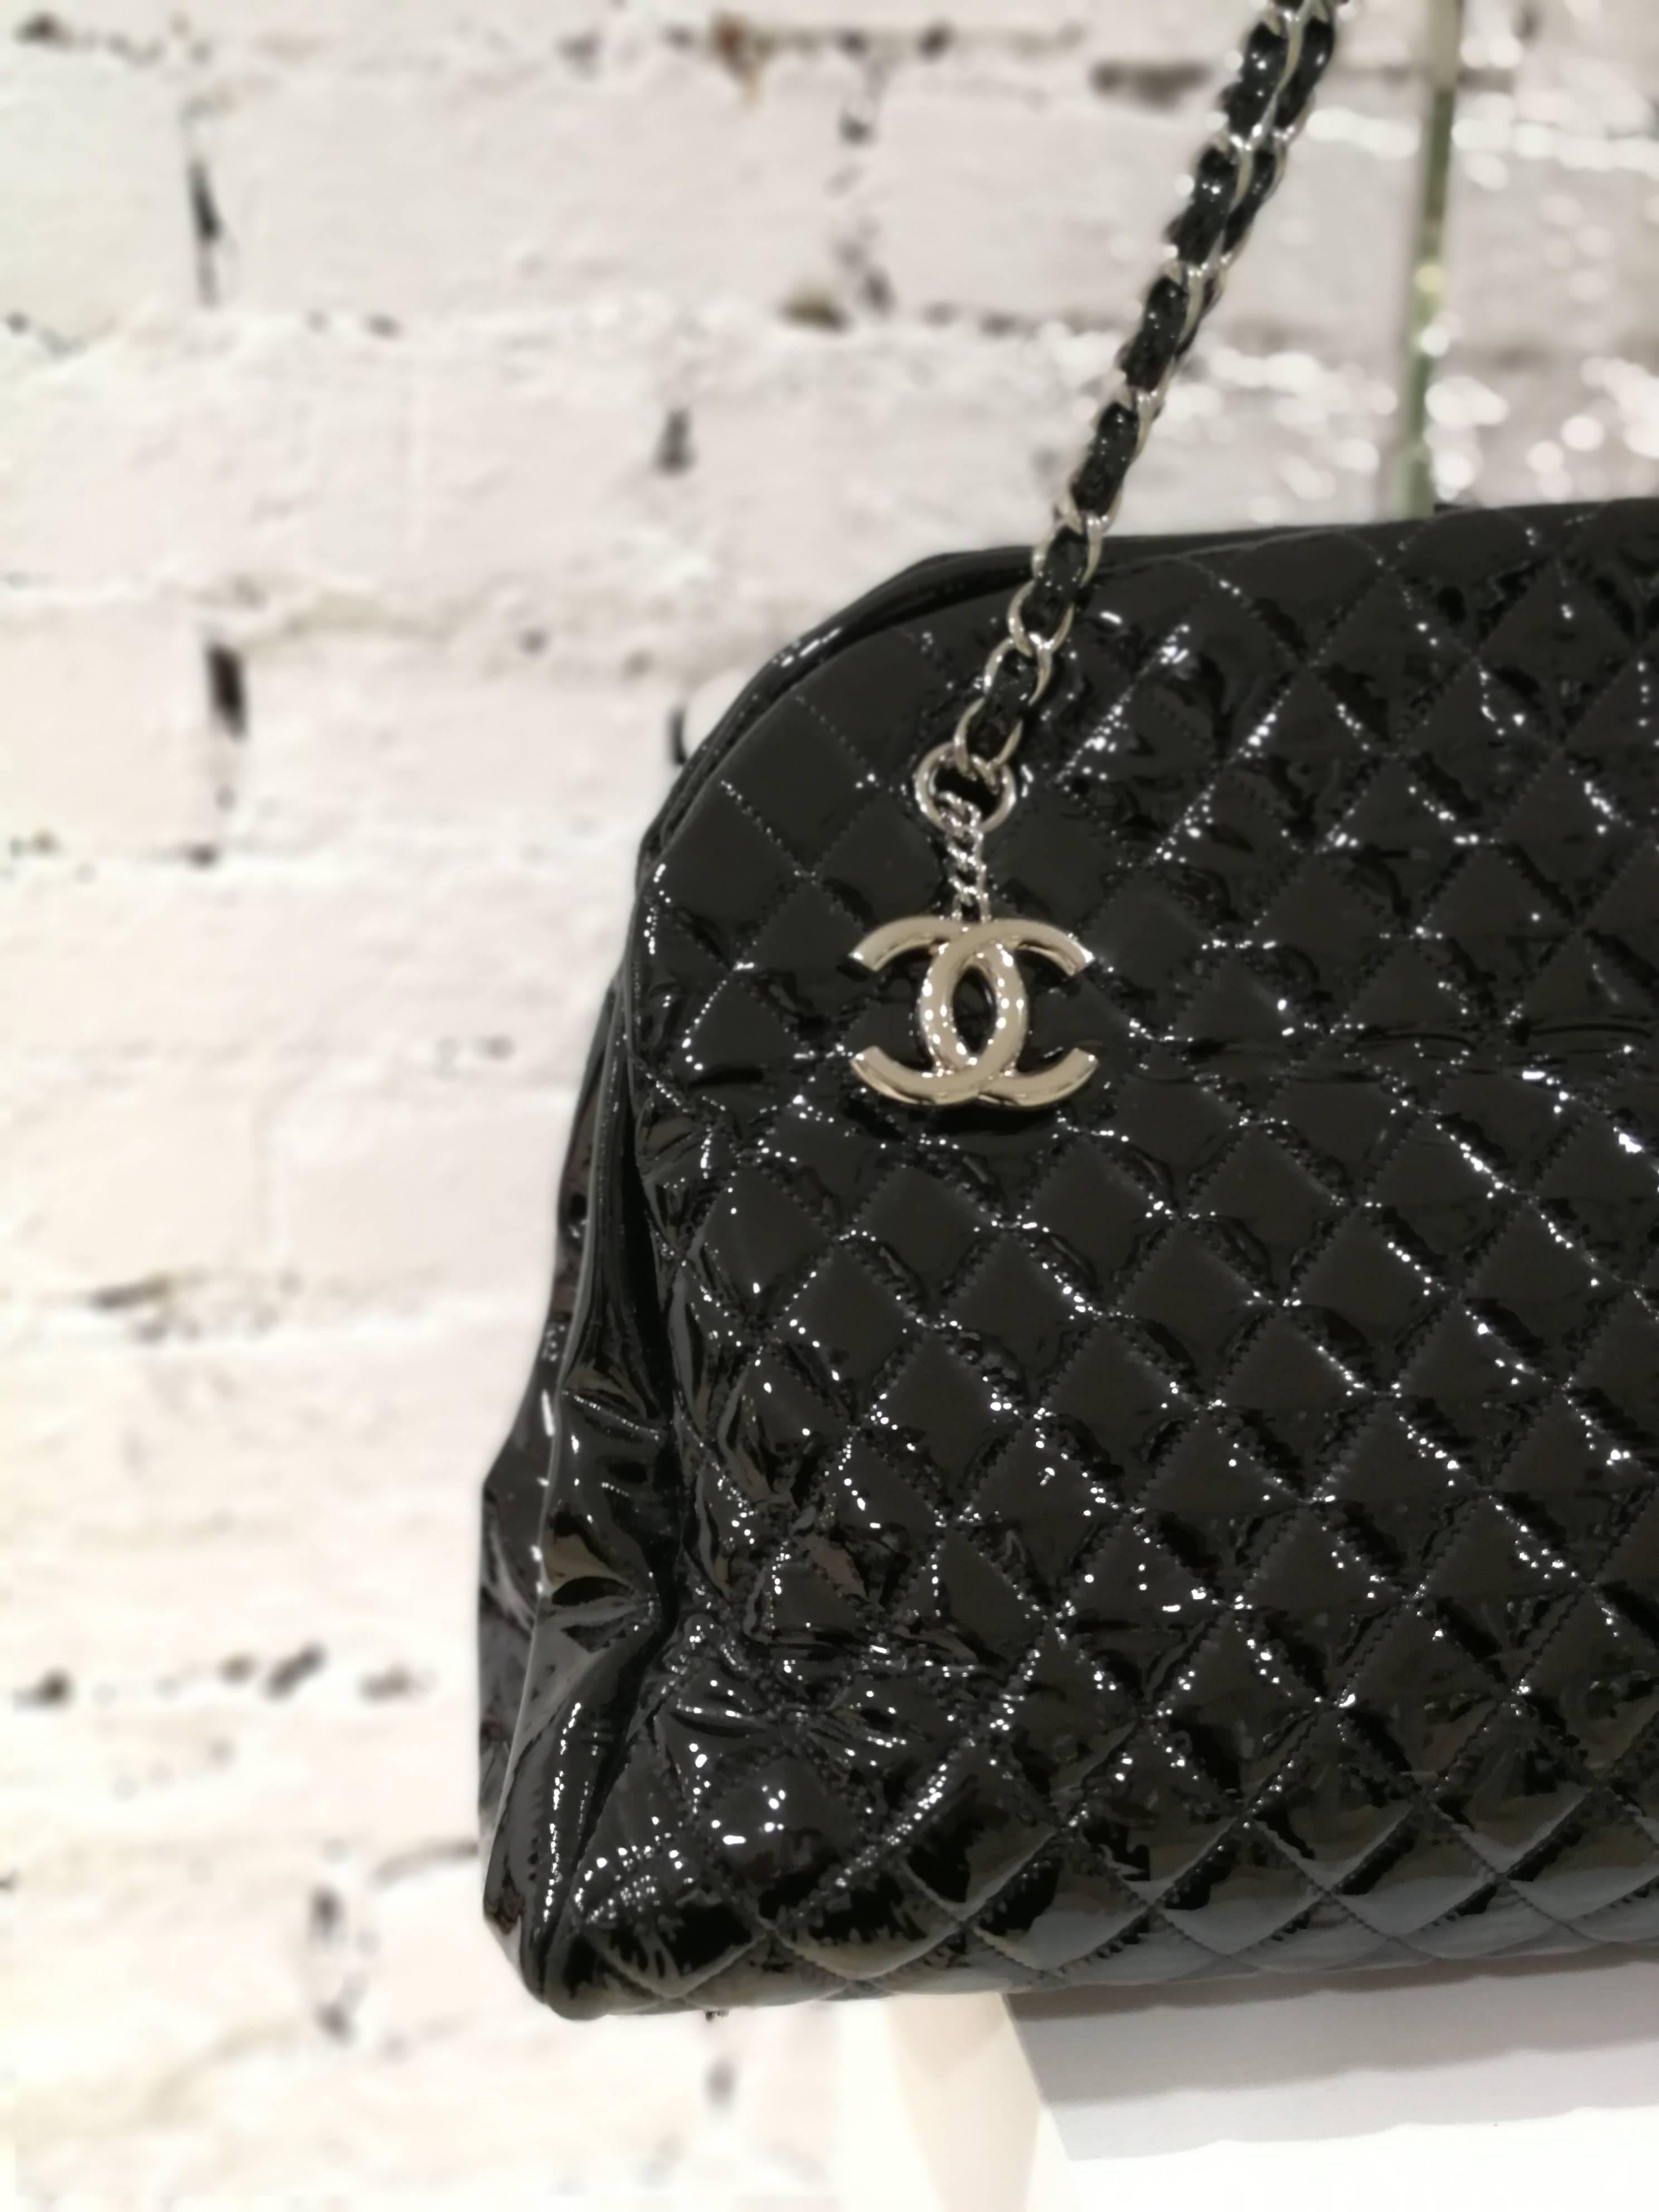 Chanel Just Mademoiselle Bowler Black patent Leather Bag 8